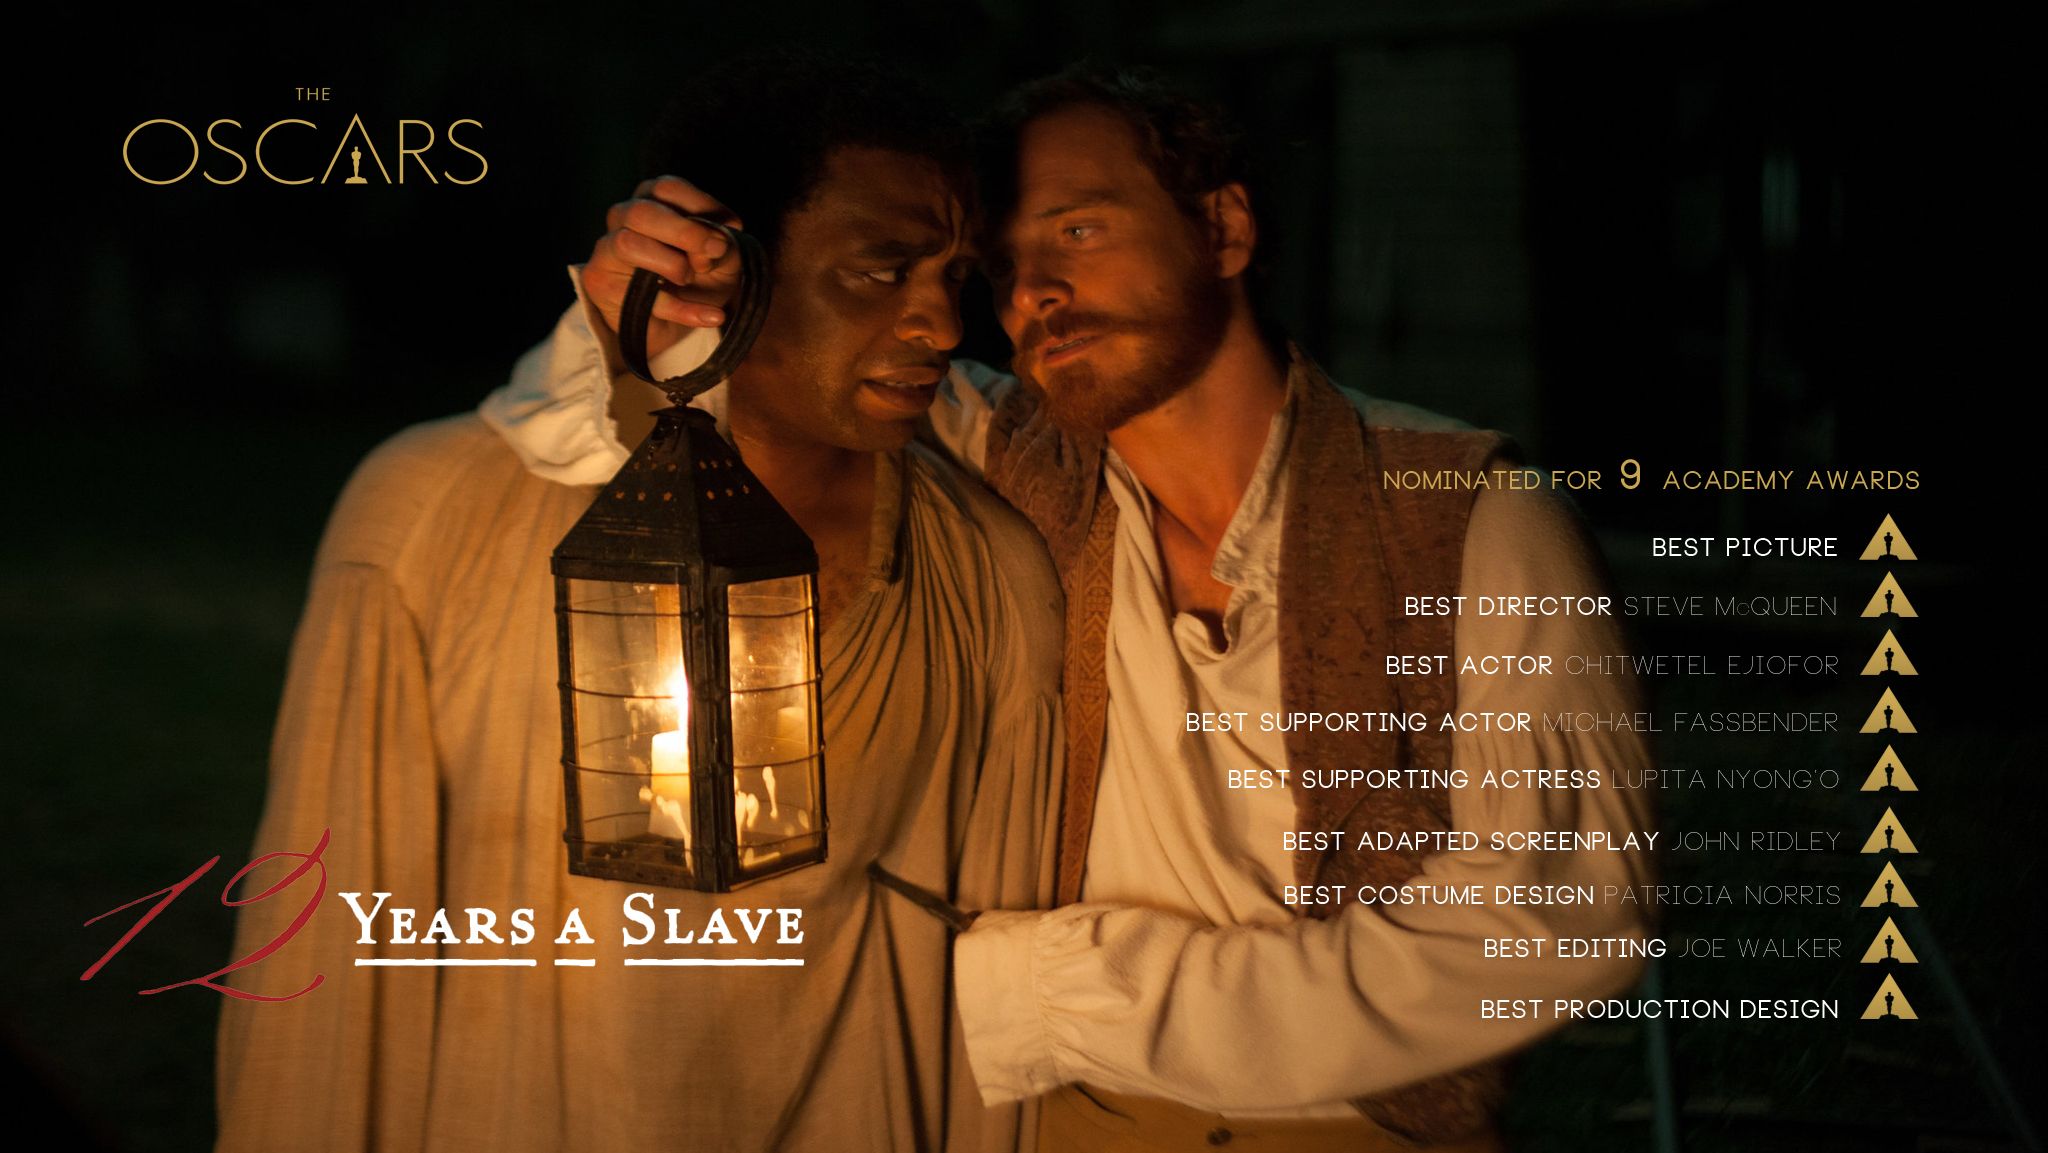 12 Years a Slave nominated for 9 Academy Awards